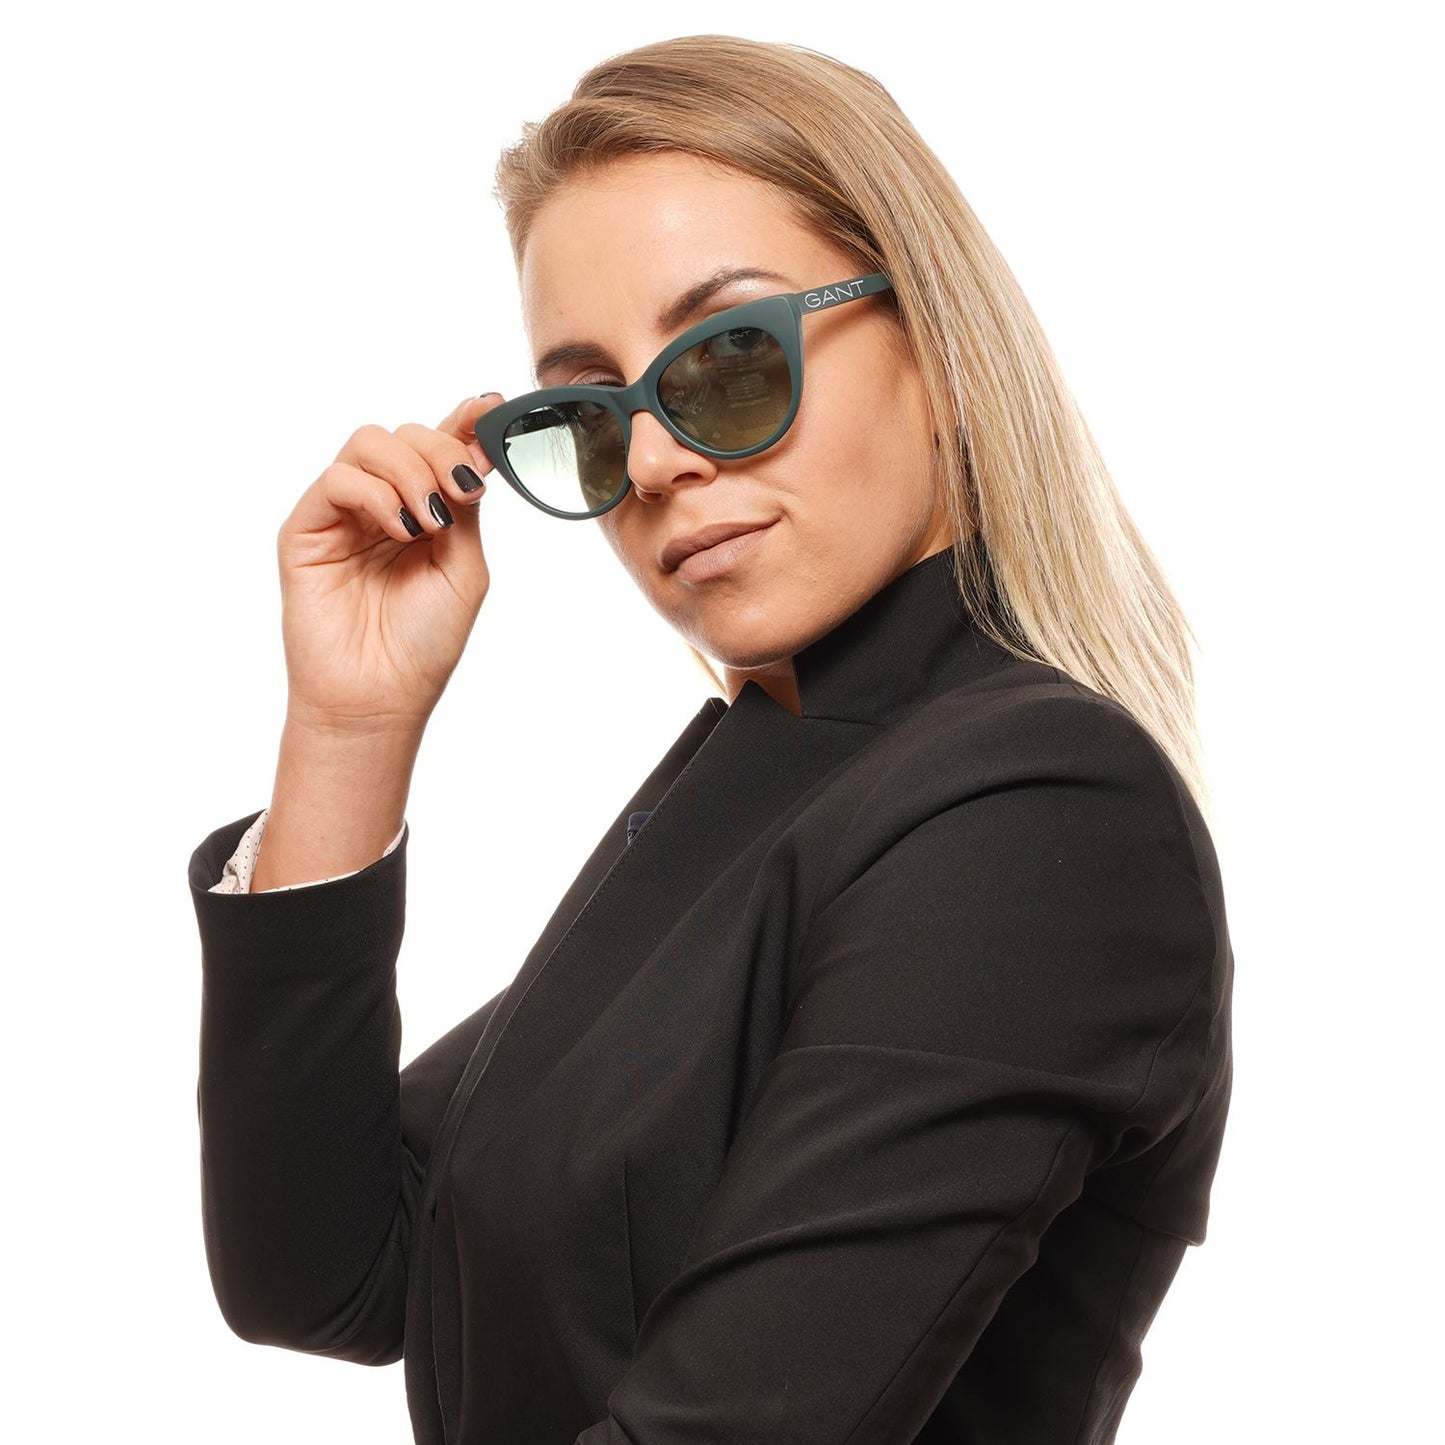 Green Sunglasses for Woman